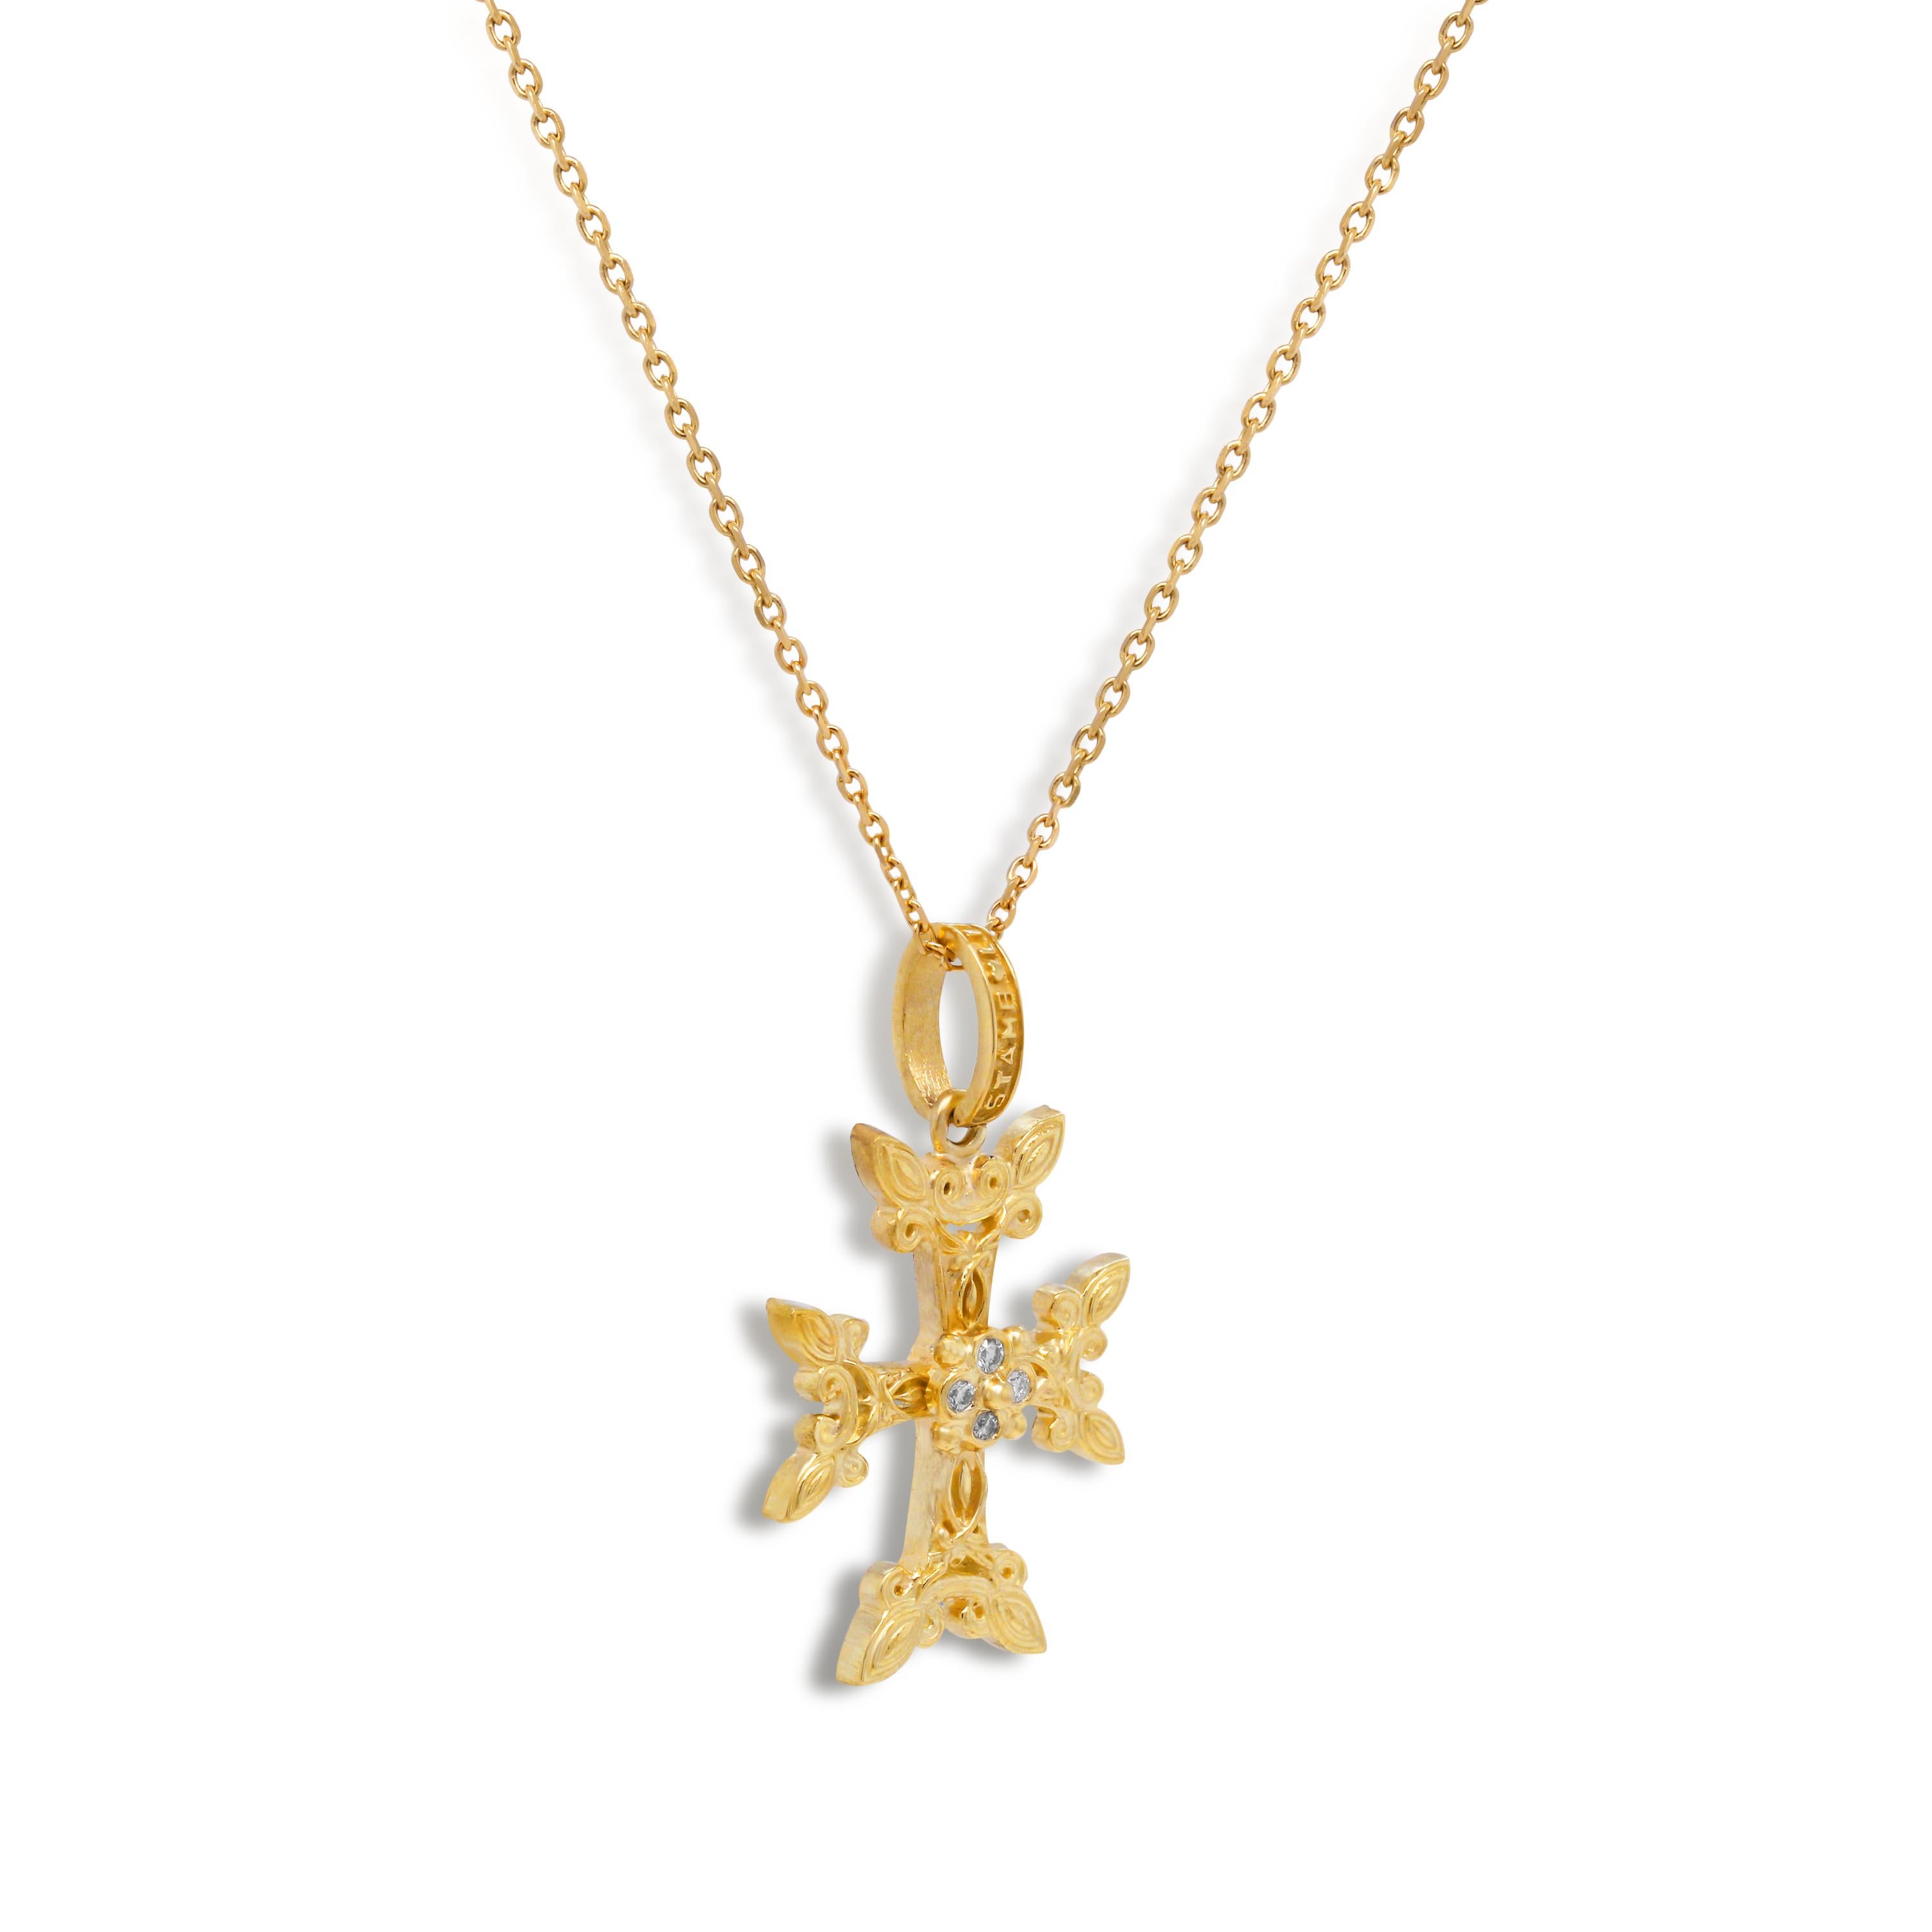 Stambolian 18 Karat Yellow Gold Diamond Armenian Cross Pendant Necklace

This gorgeous Armenian cross pendant is crafted in solid 18k gold and features a four diamond cluster in the center.

0.06 carat G color, VS clarity diamonds total